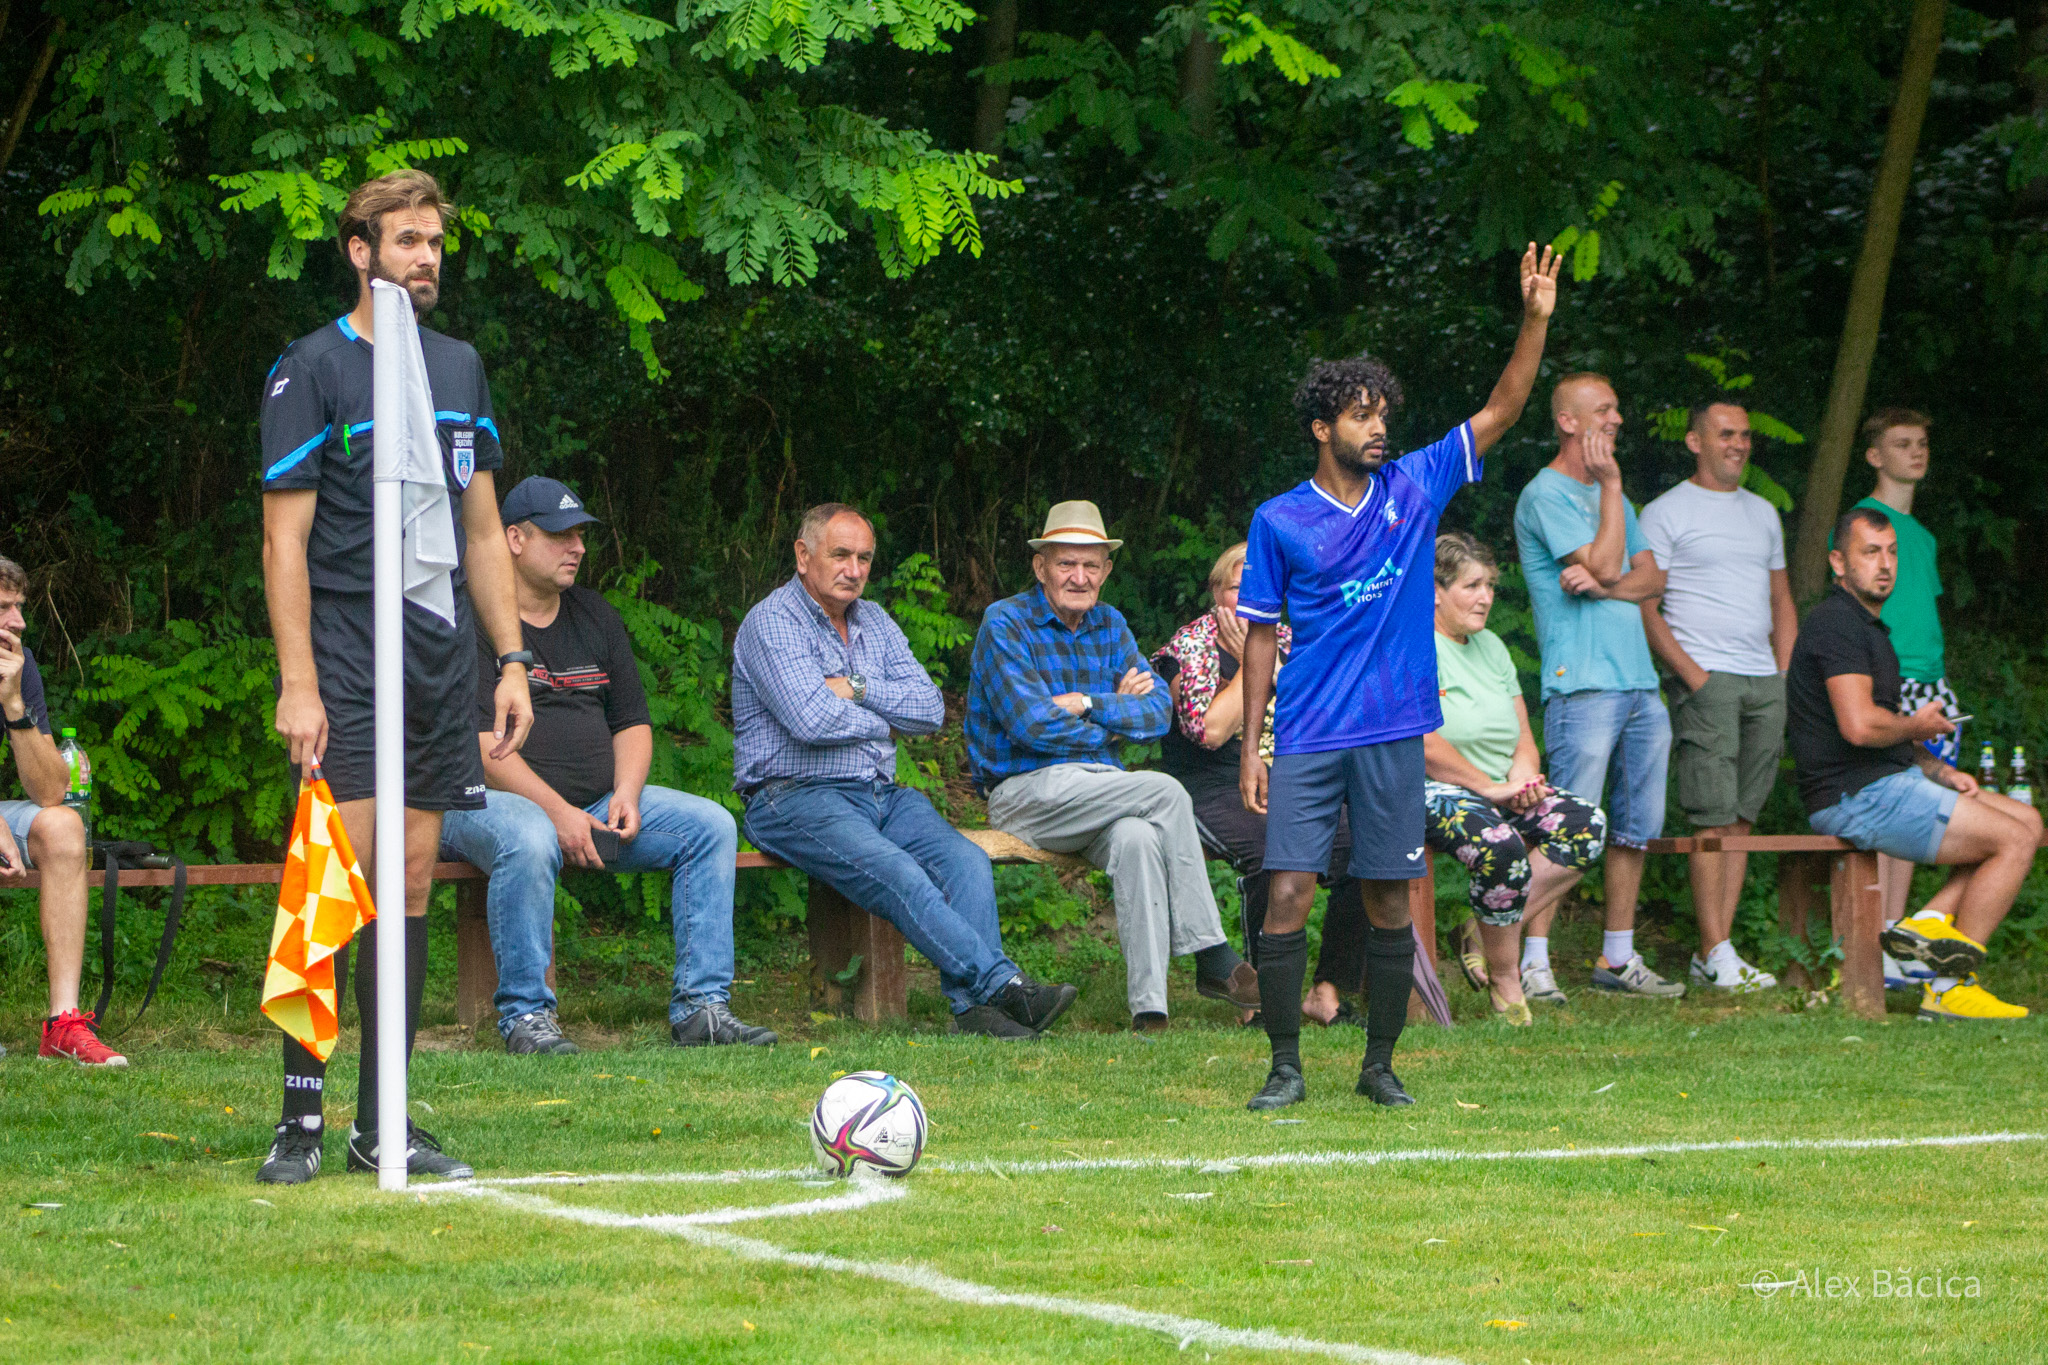 Rohit Chandran of Krakow Dragoons FC preparing a corner with the fans in the background